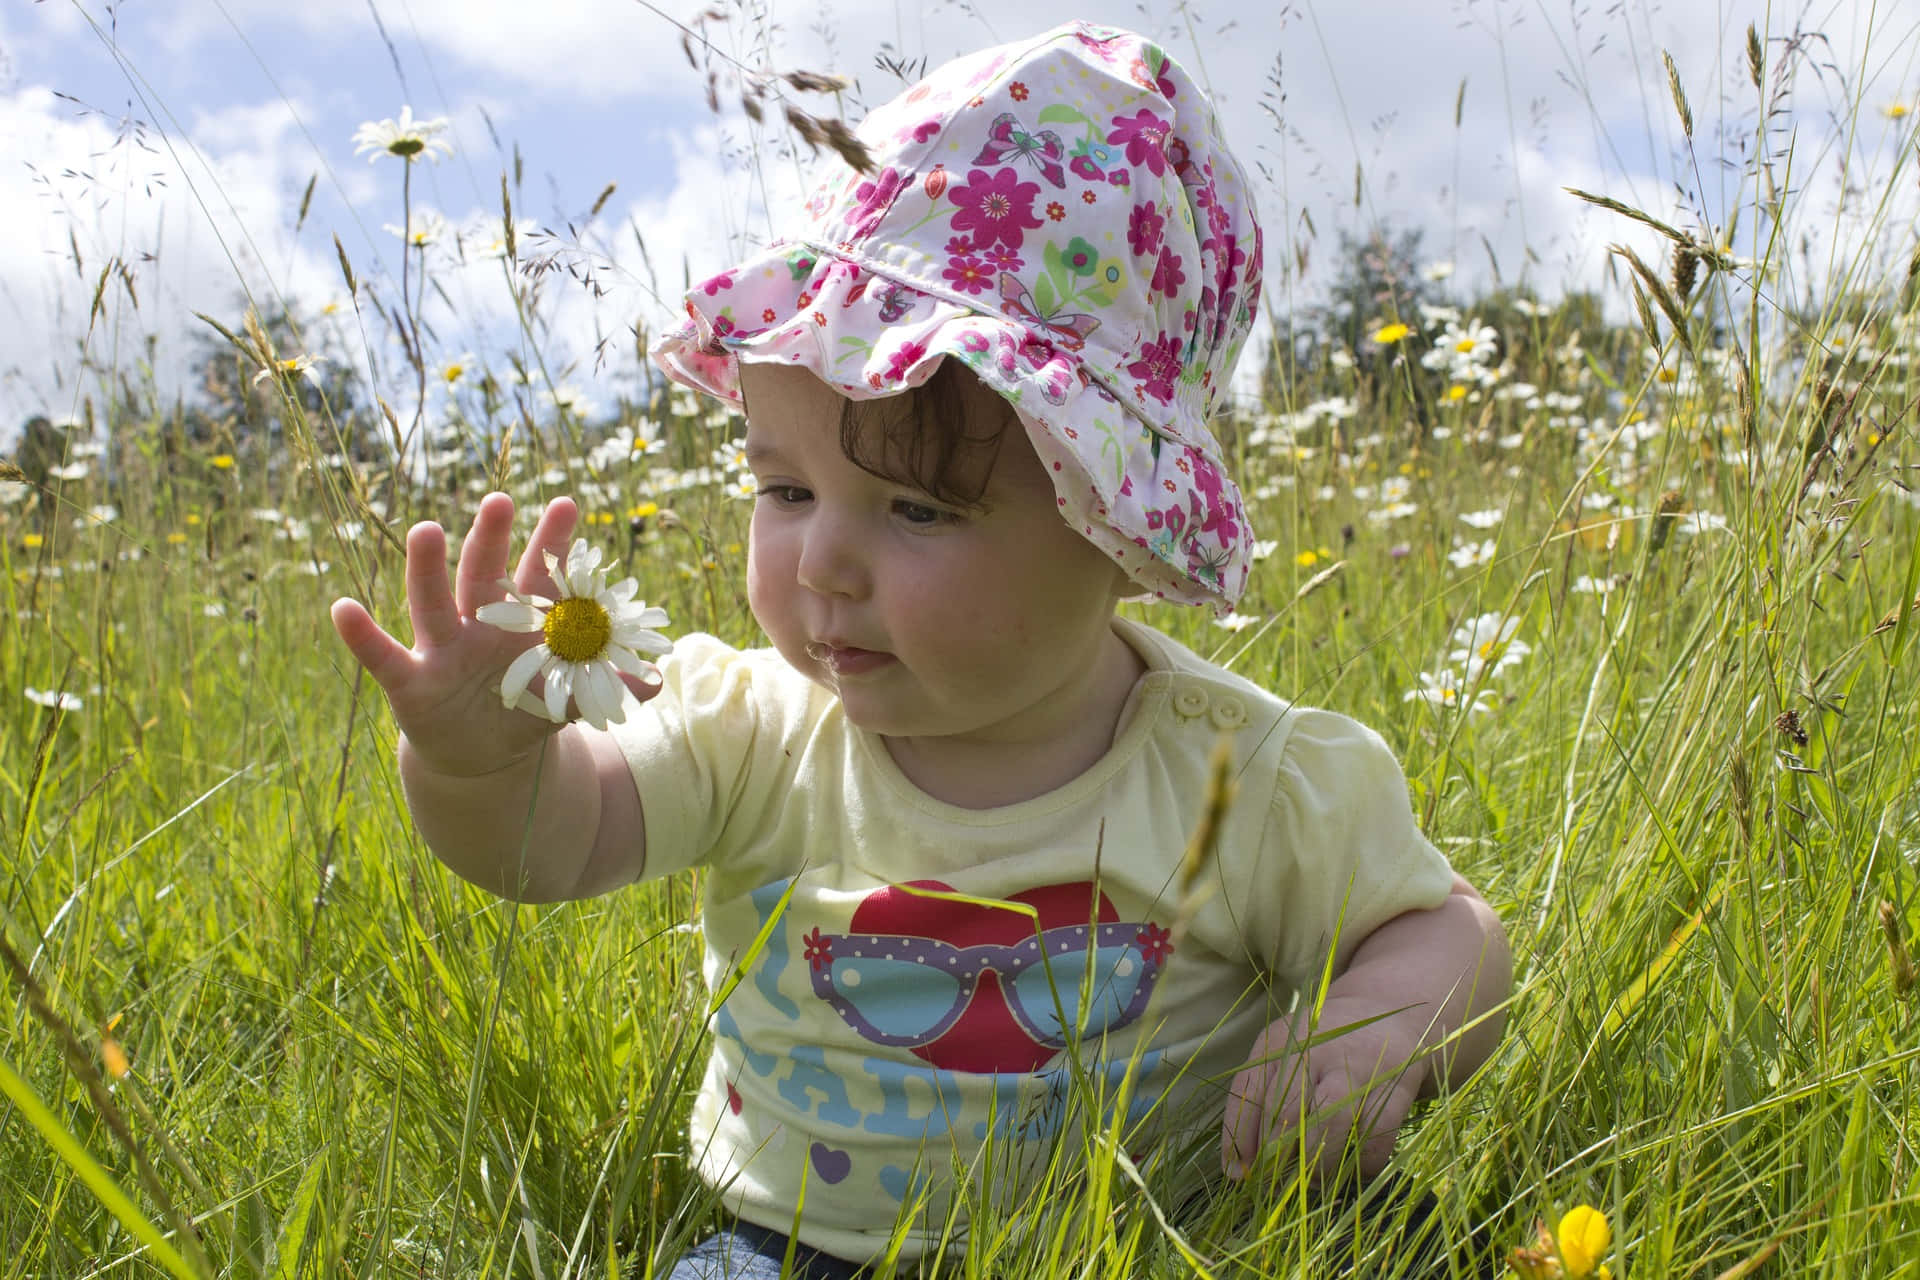 Cute Photo Of A Baby Girl In A Grass Field Touching A Tangible Flower Wallpaper